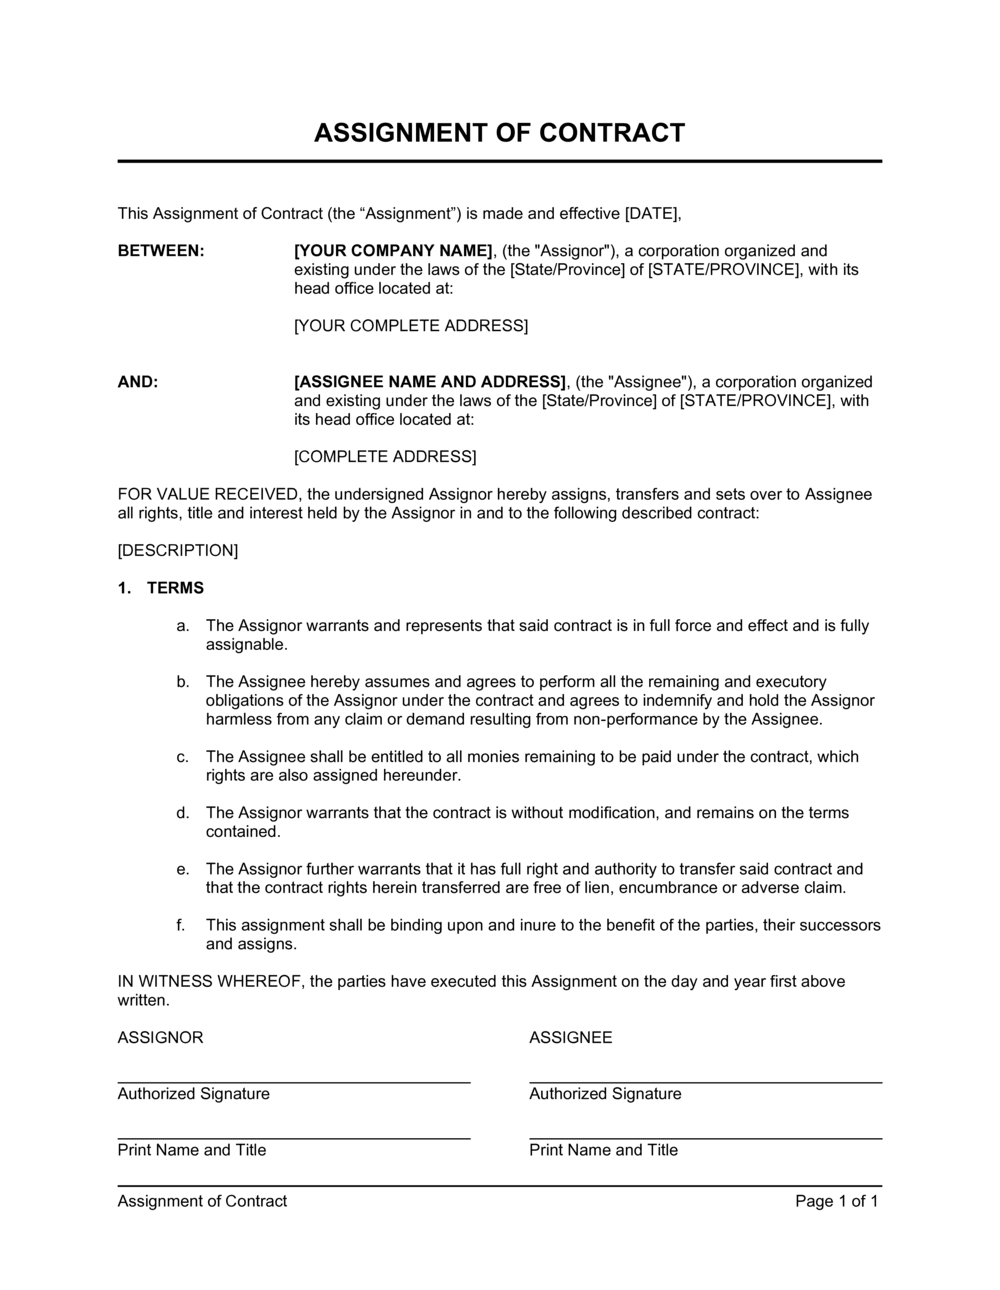 assignment and agreement form